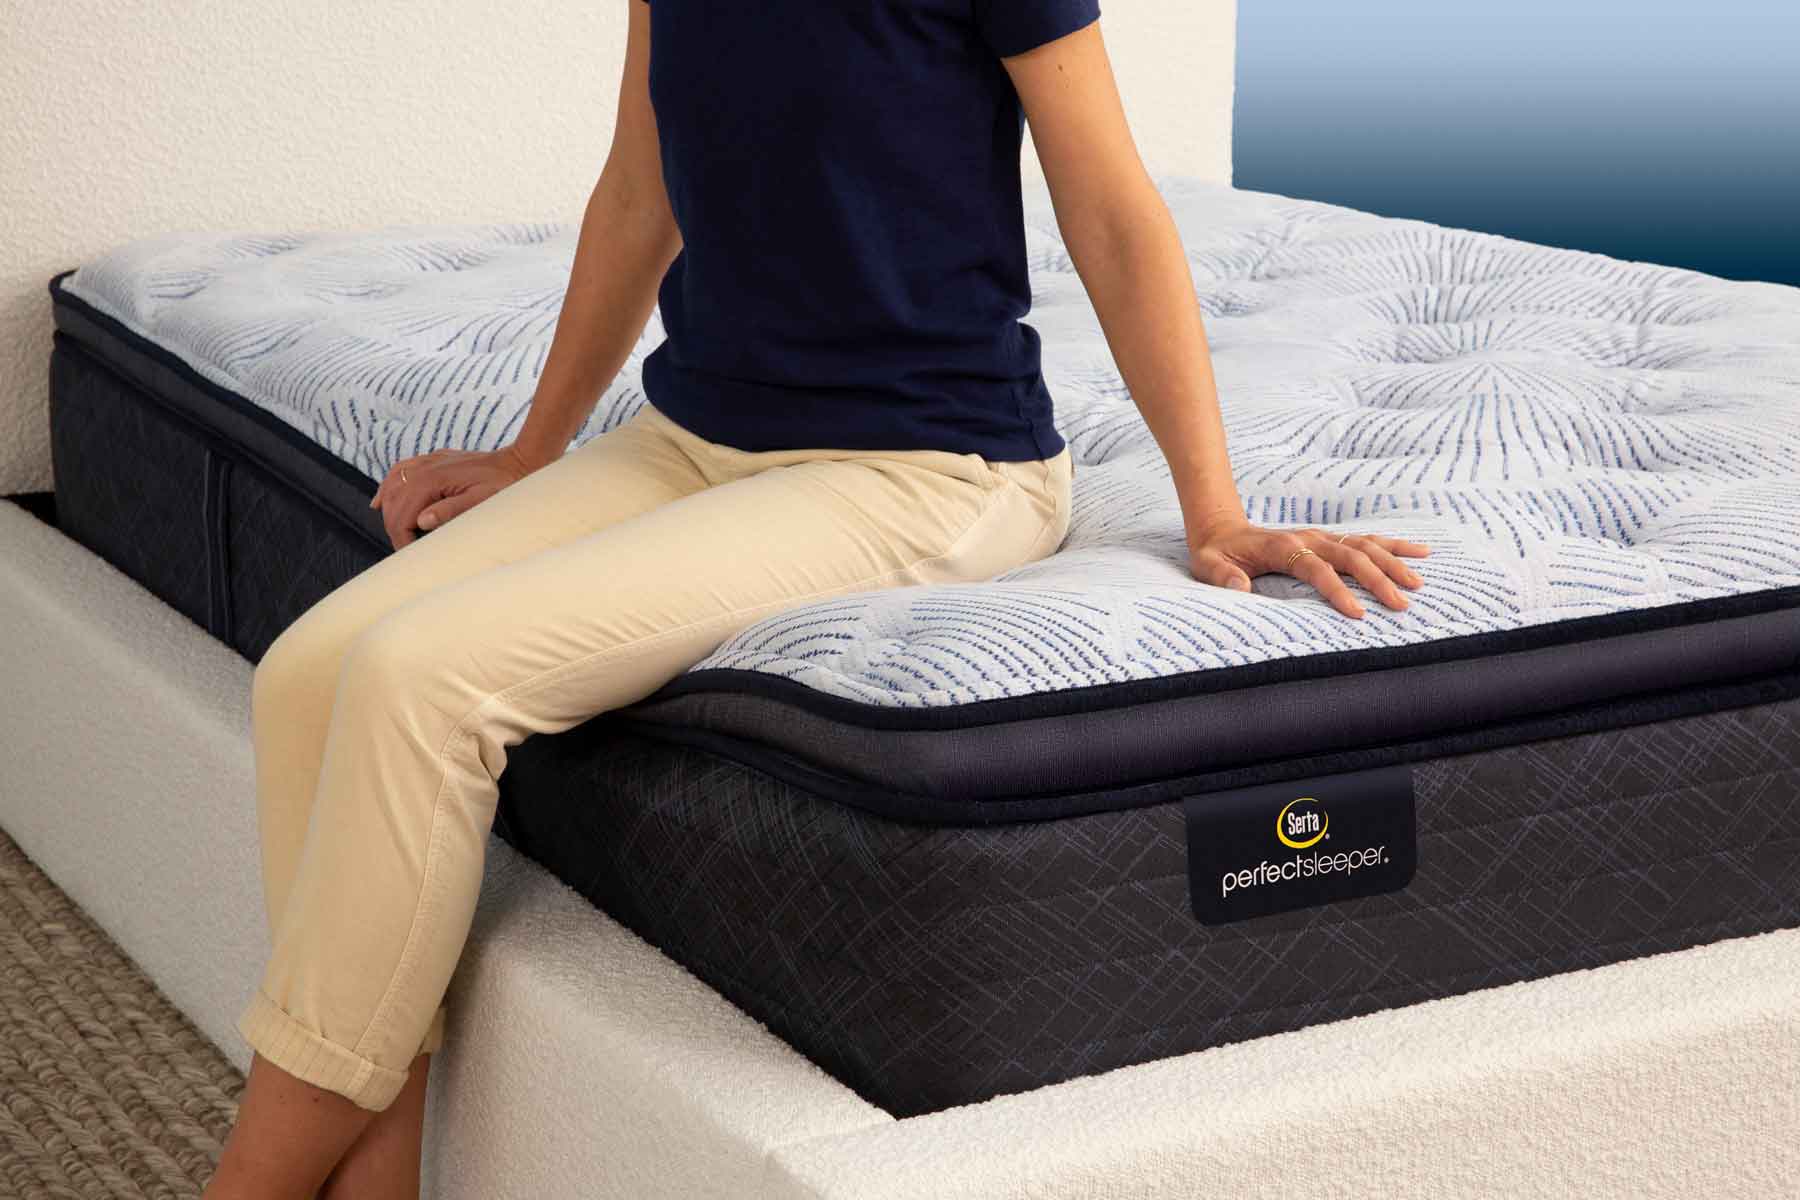 What You Need To Know About The Serta Perfect Sleeper Mattress